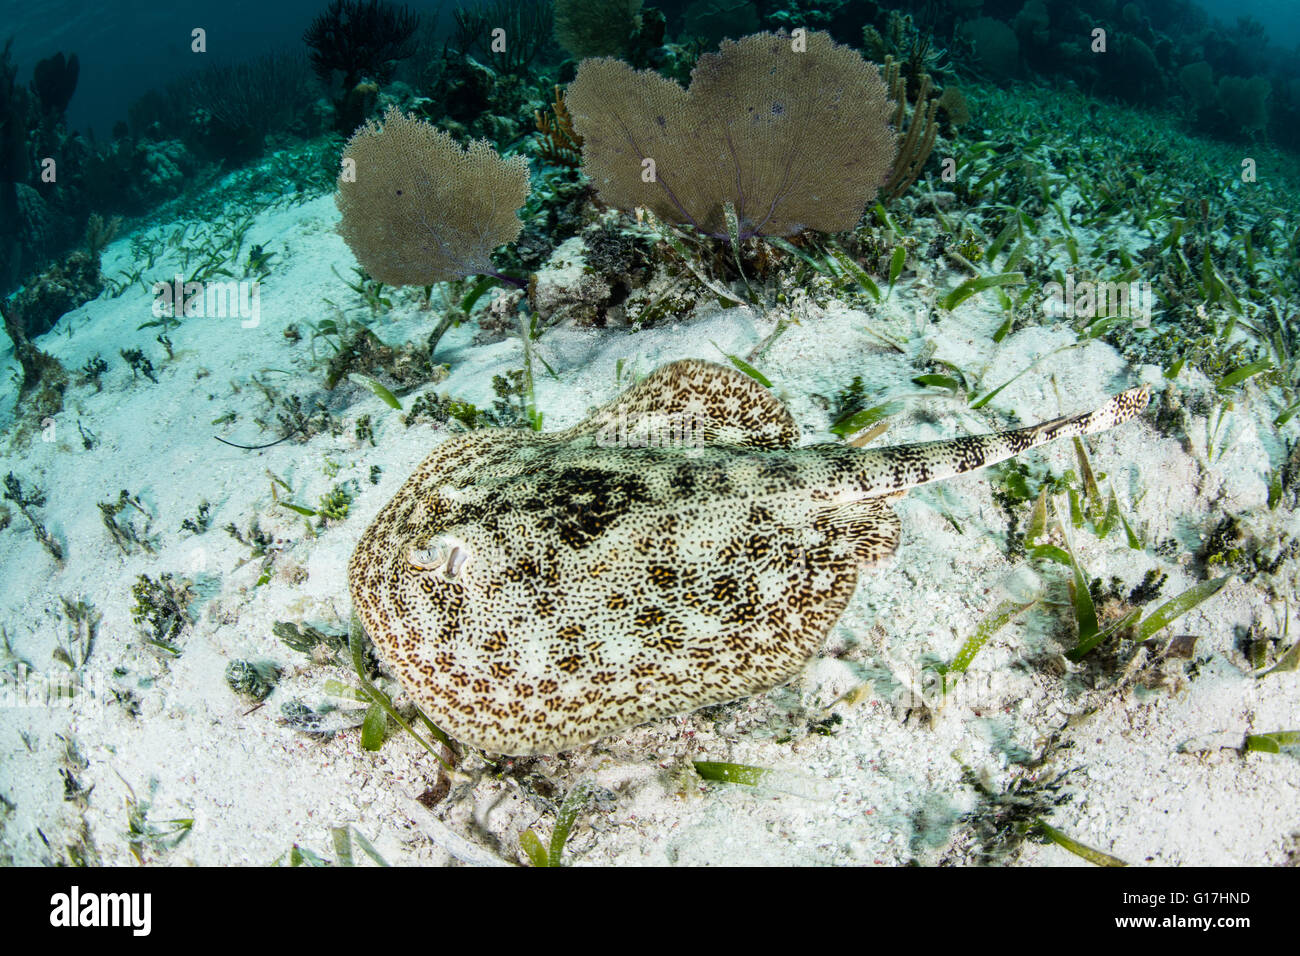 A Yellow stingray (Urobatis jamaicensis) is found on seagrass in Belize. This elasmobranch is common in the Caribbean Sea. Stock Photo